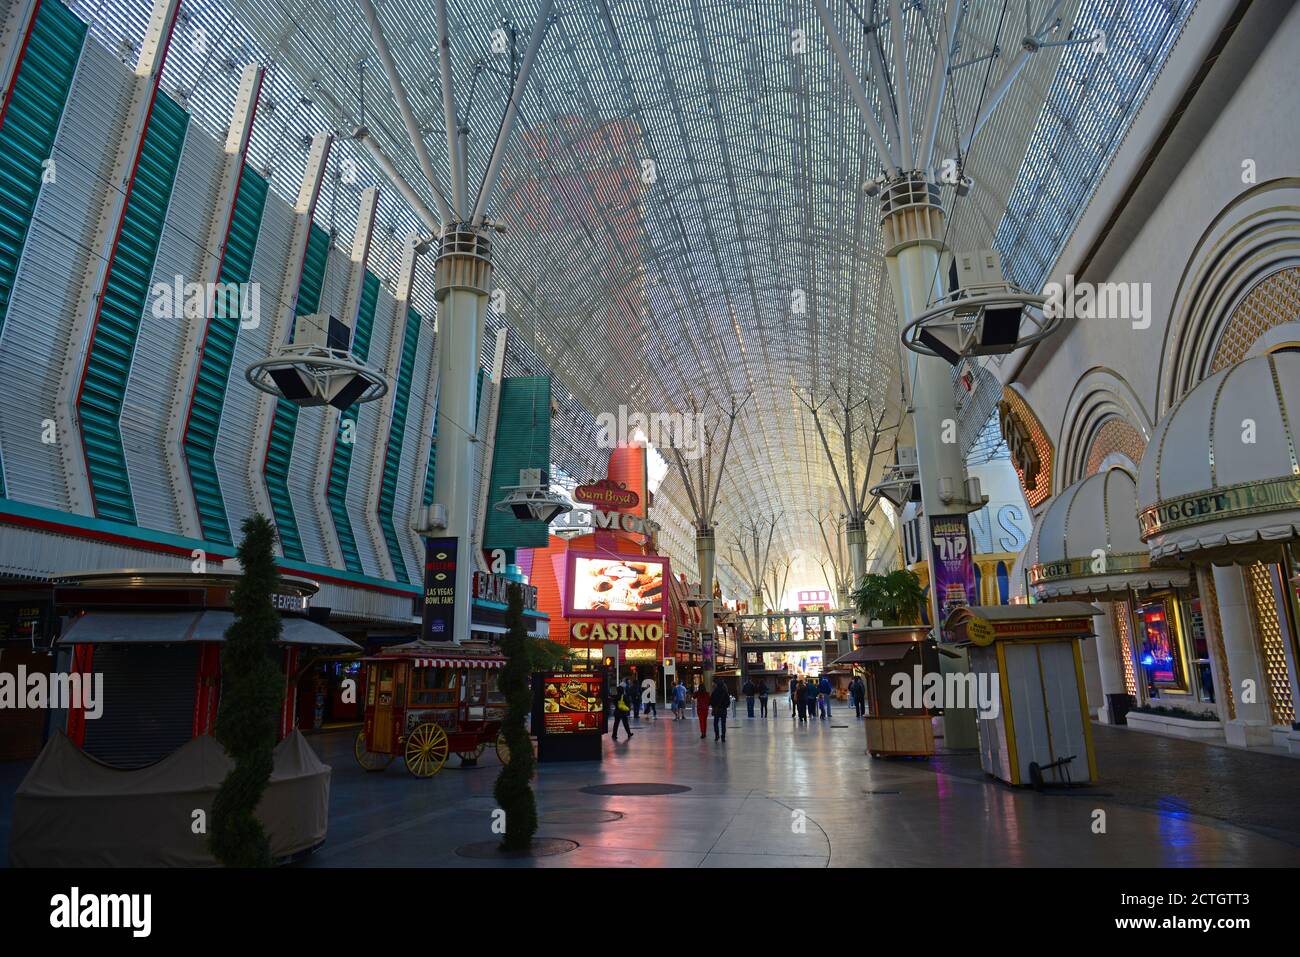 The Binion's Hotel and Casino on Fremont Street Experience in downtown Las Vegas, Nevada, USA. Stock Photo